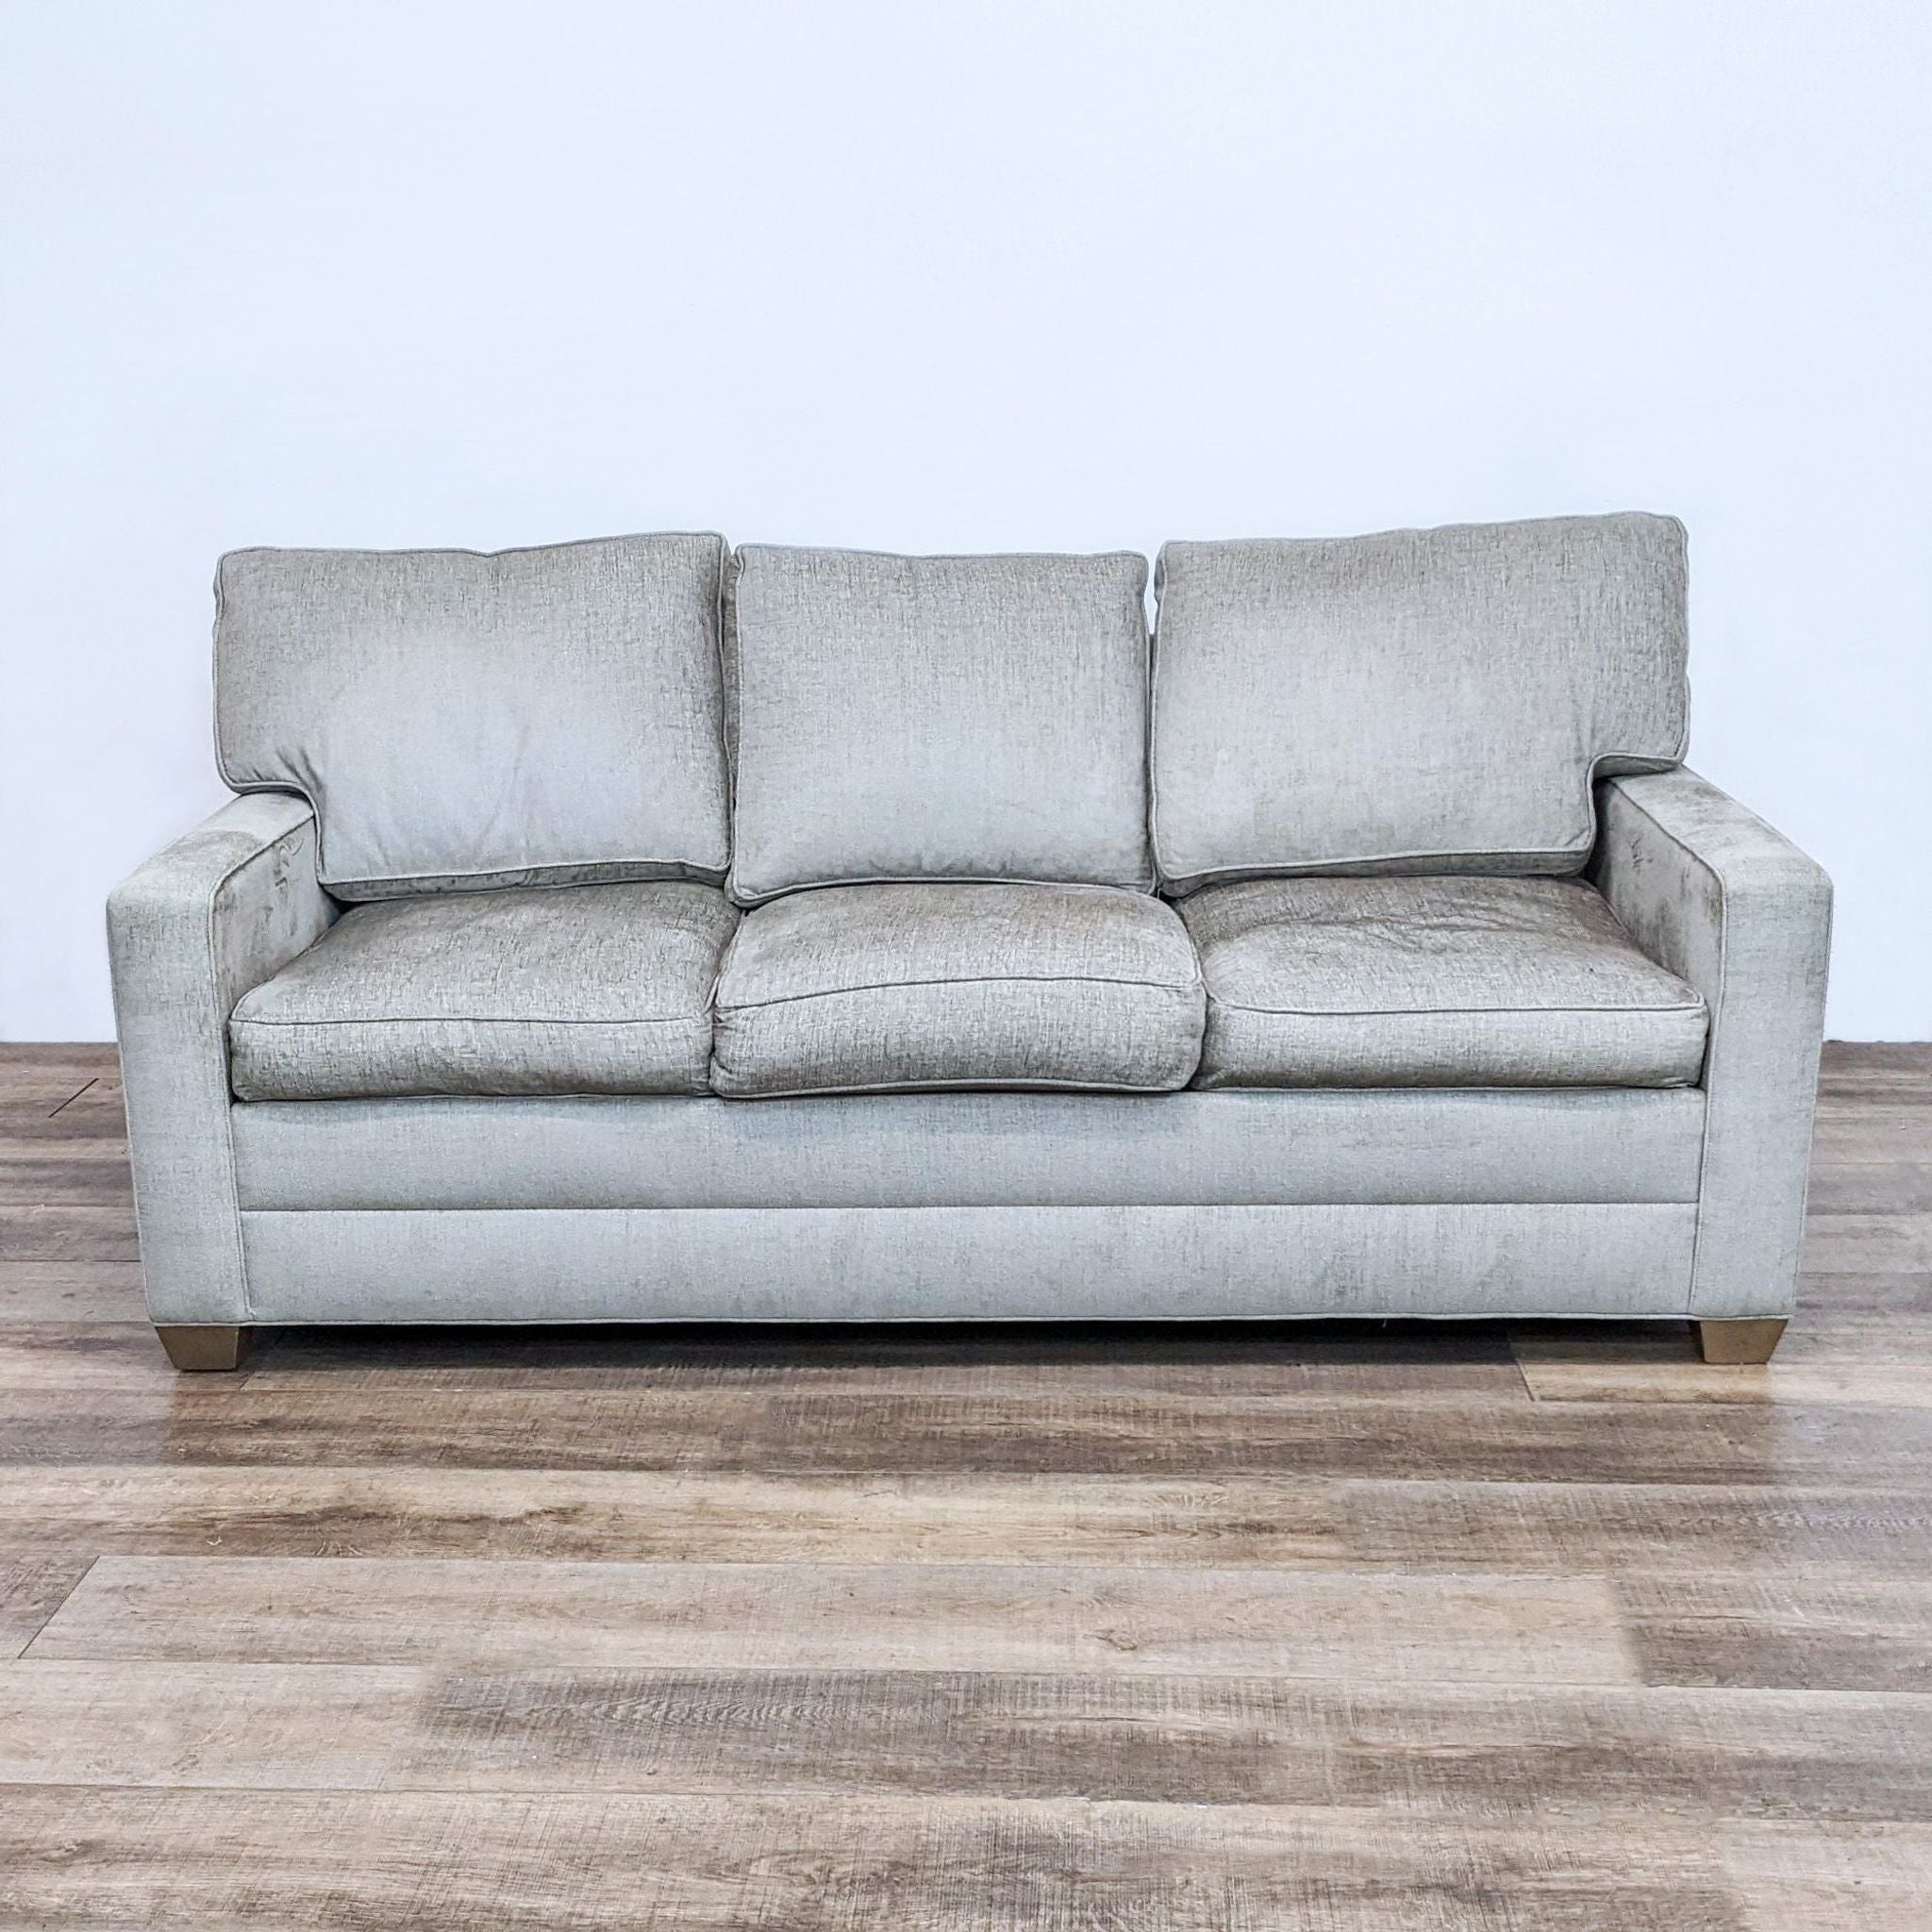 Ethan Allen Spencer modern 3-seat sofa with track arms and T-back cushions on wood finish feet.